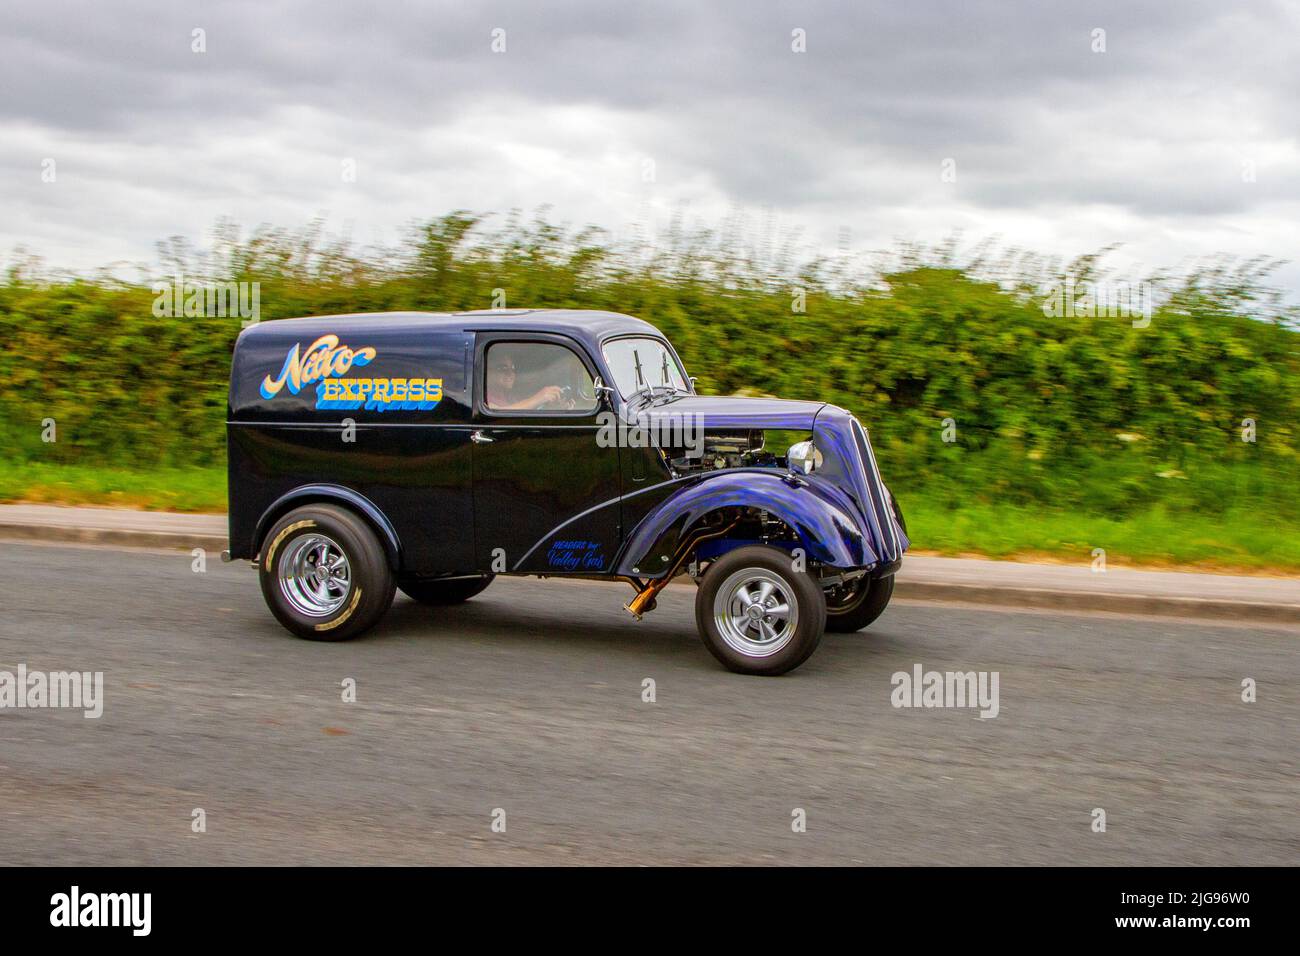 117 Fordson 8 Van (Mod Hot Rod) Van. 1948 40s blue purple forties Ford Anglia 'Nitro Express' based on Fords 5cwt Van. Hot rods cars, drag cars, ANGLIA, hot rod, retro, drag racing, race gasser, street rods. Modified cars en-route to Hoghton Tower for the Supercar Summer Showtime car meet which is organised by Great British Motor Shows in Preston, UK Stock Photo